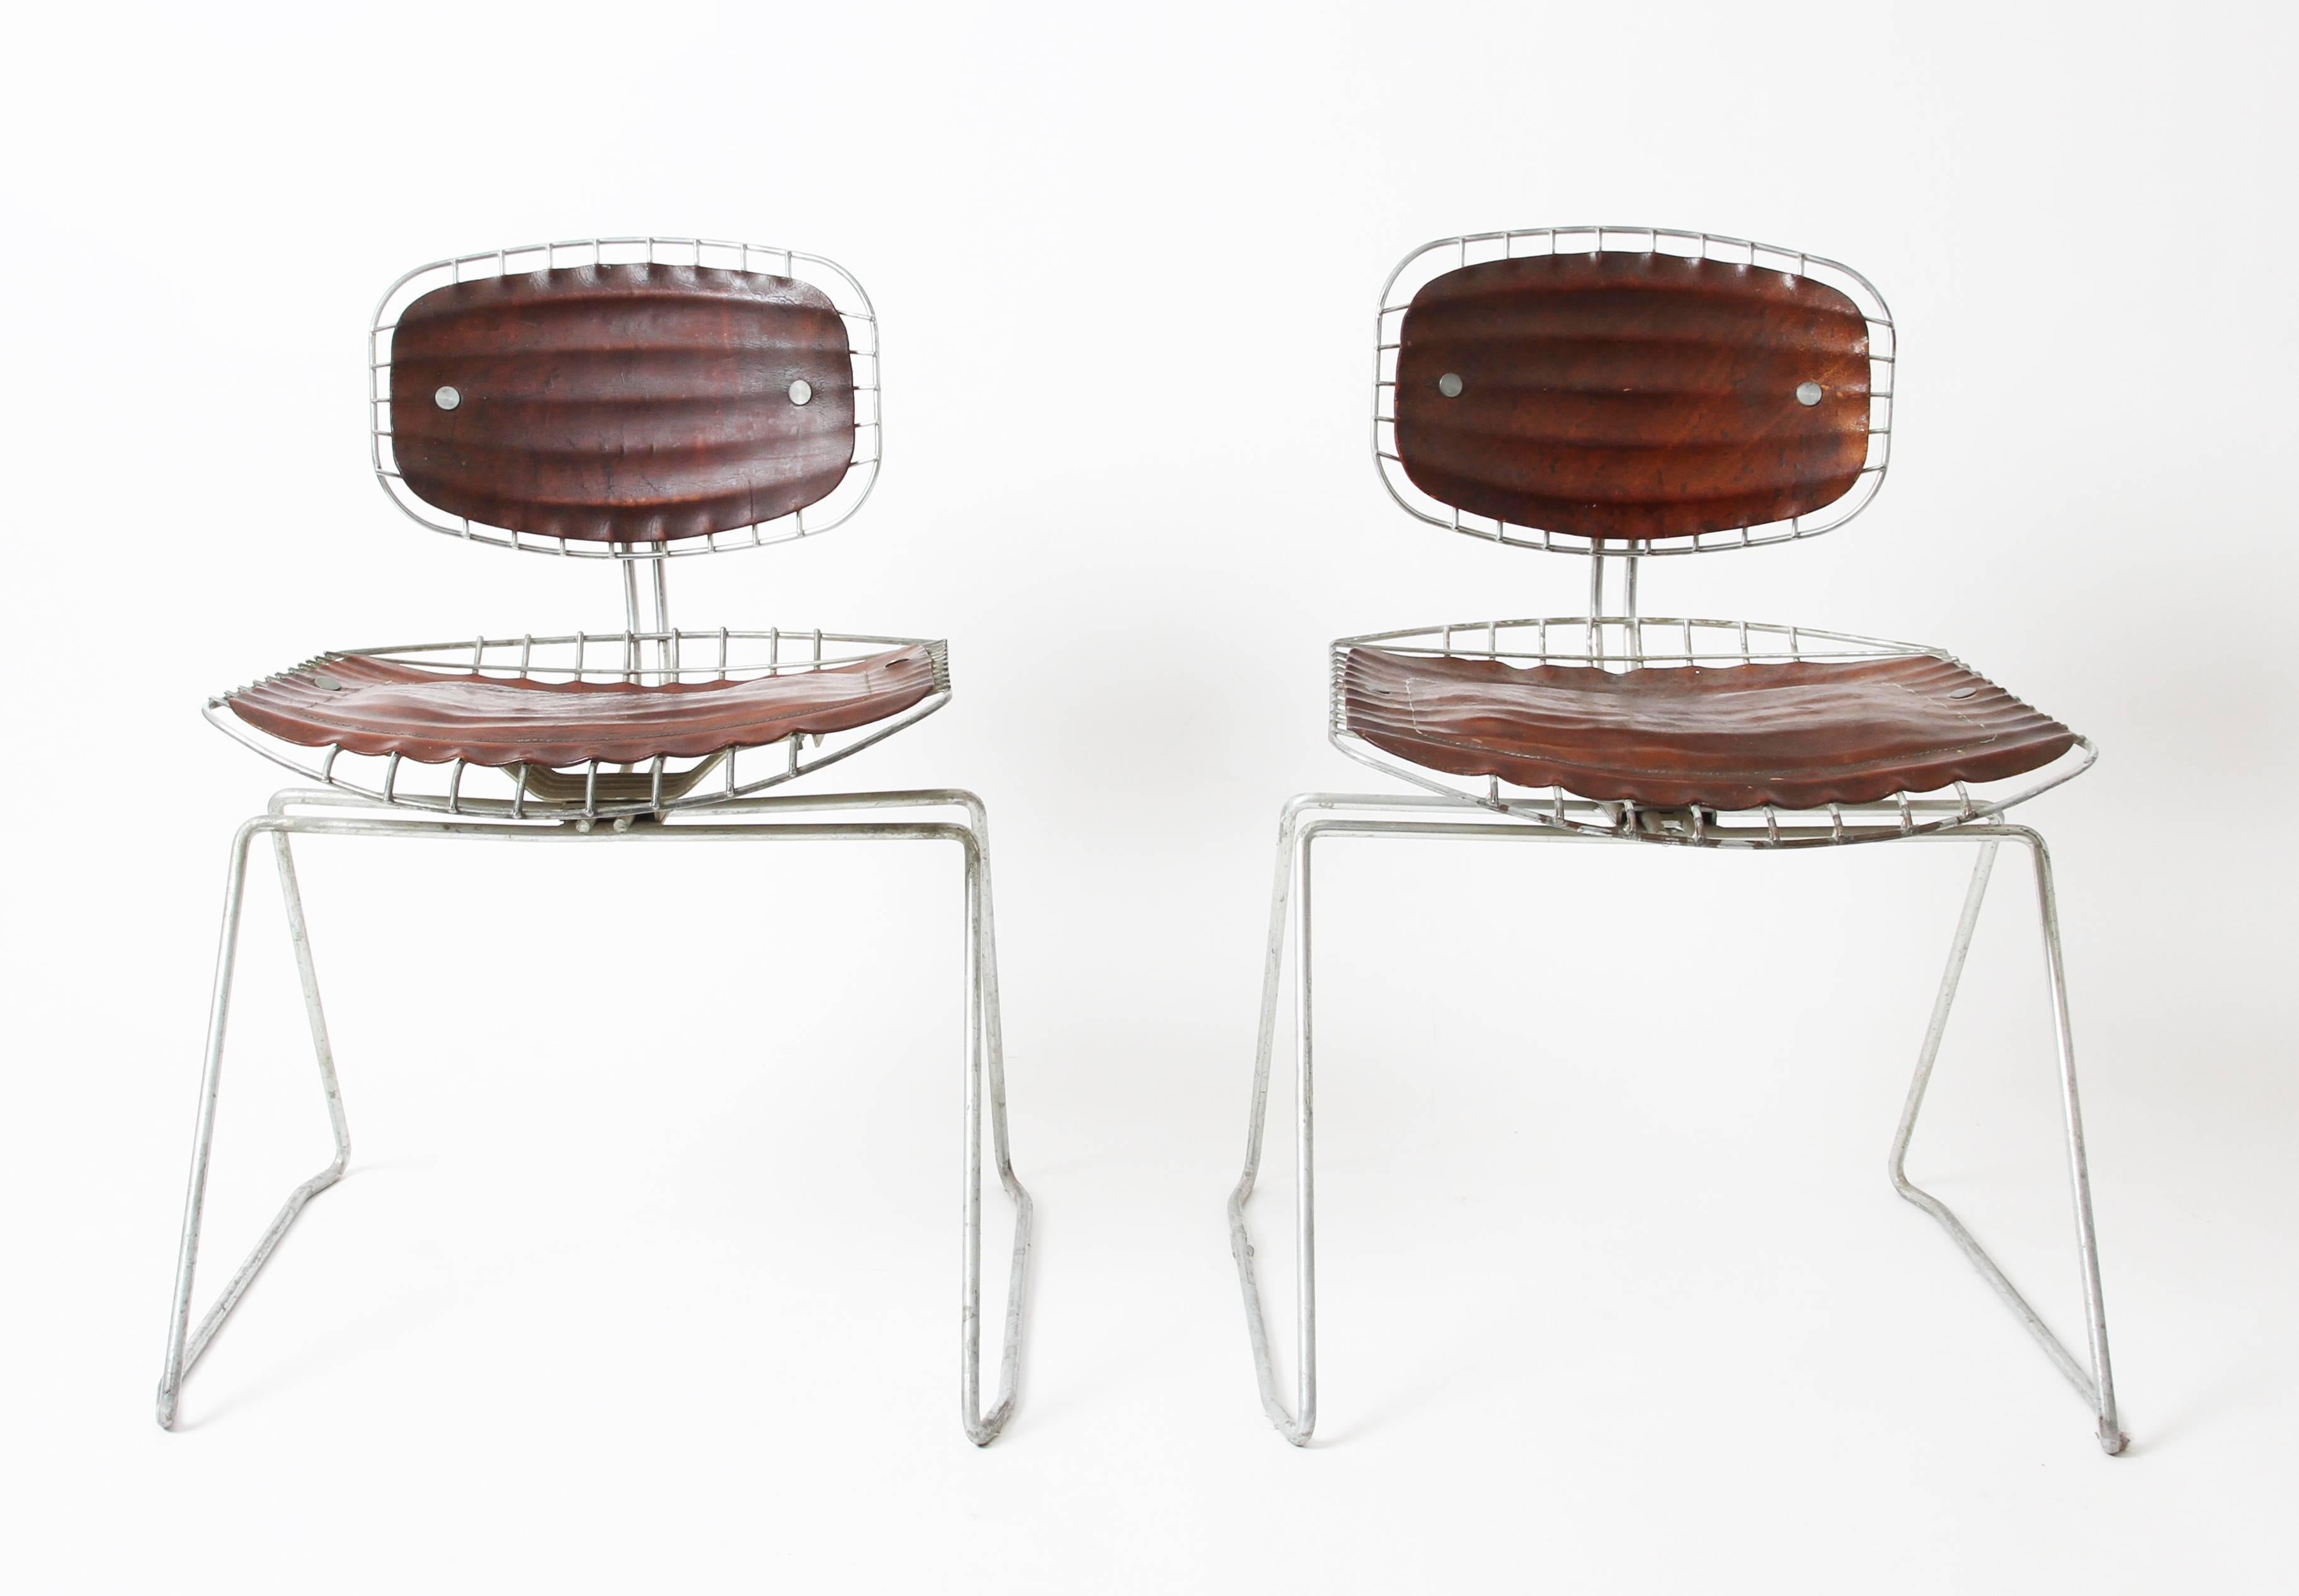 Michel Cadestin
leather and metal Beaubourg chairs,
Design in 1976 for Centre Georges Pompidou, Paris.
Beautiful condition with nice patina on originals leathers pieces.